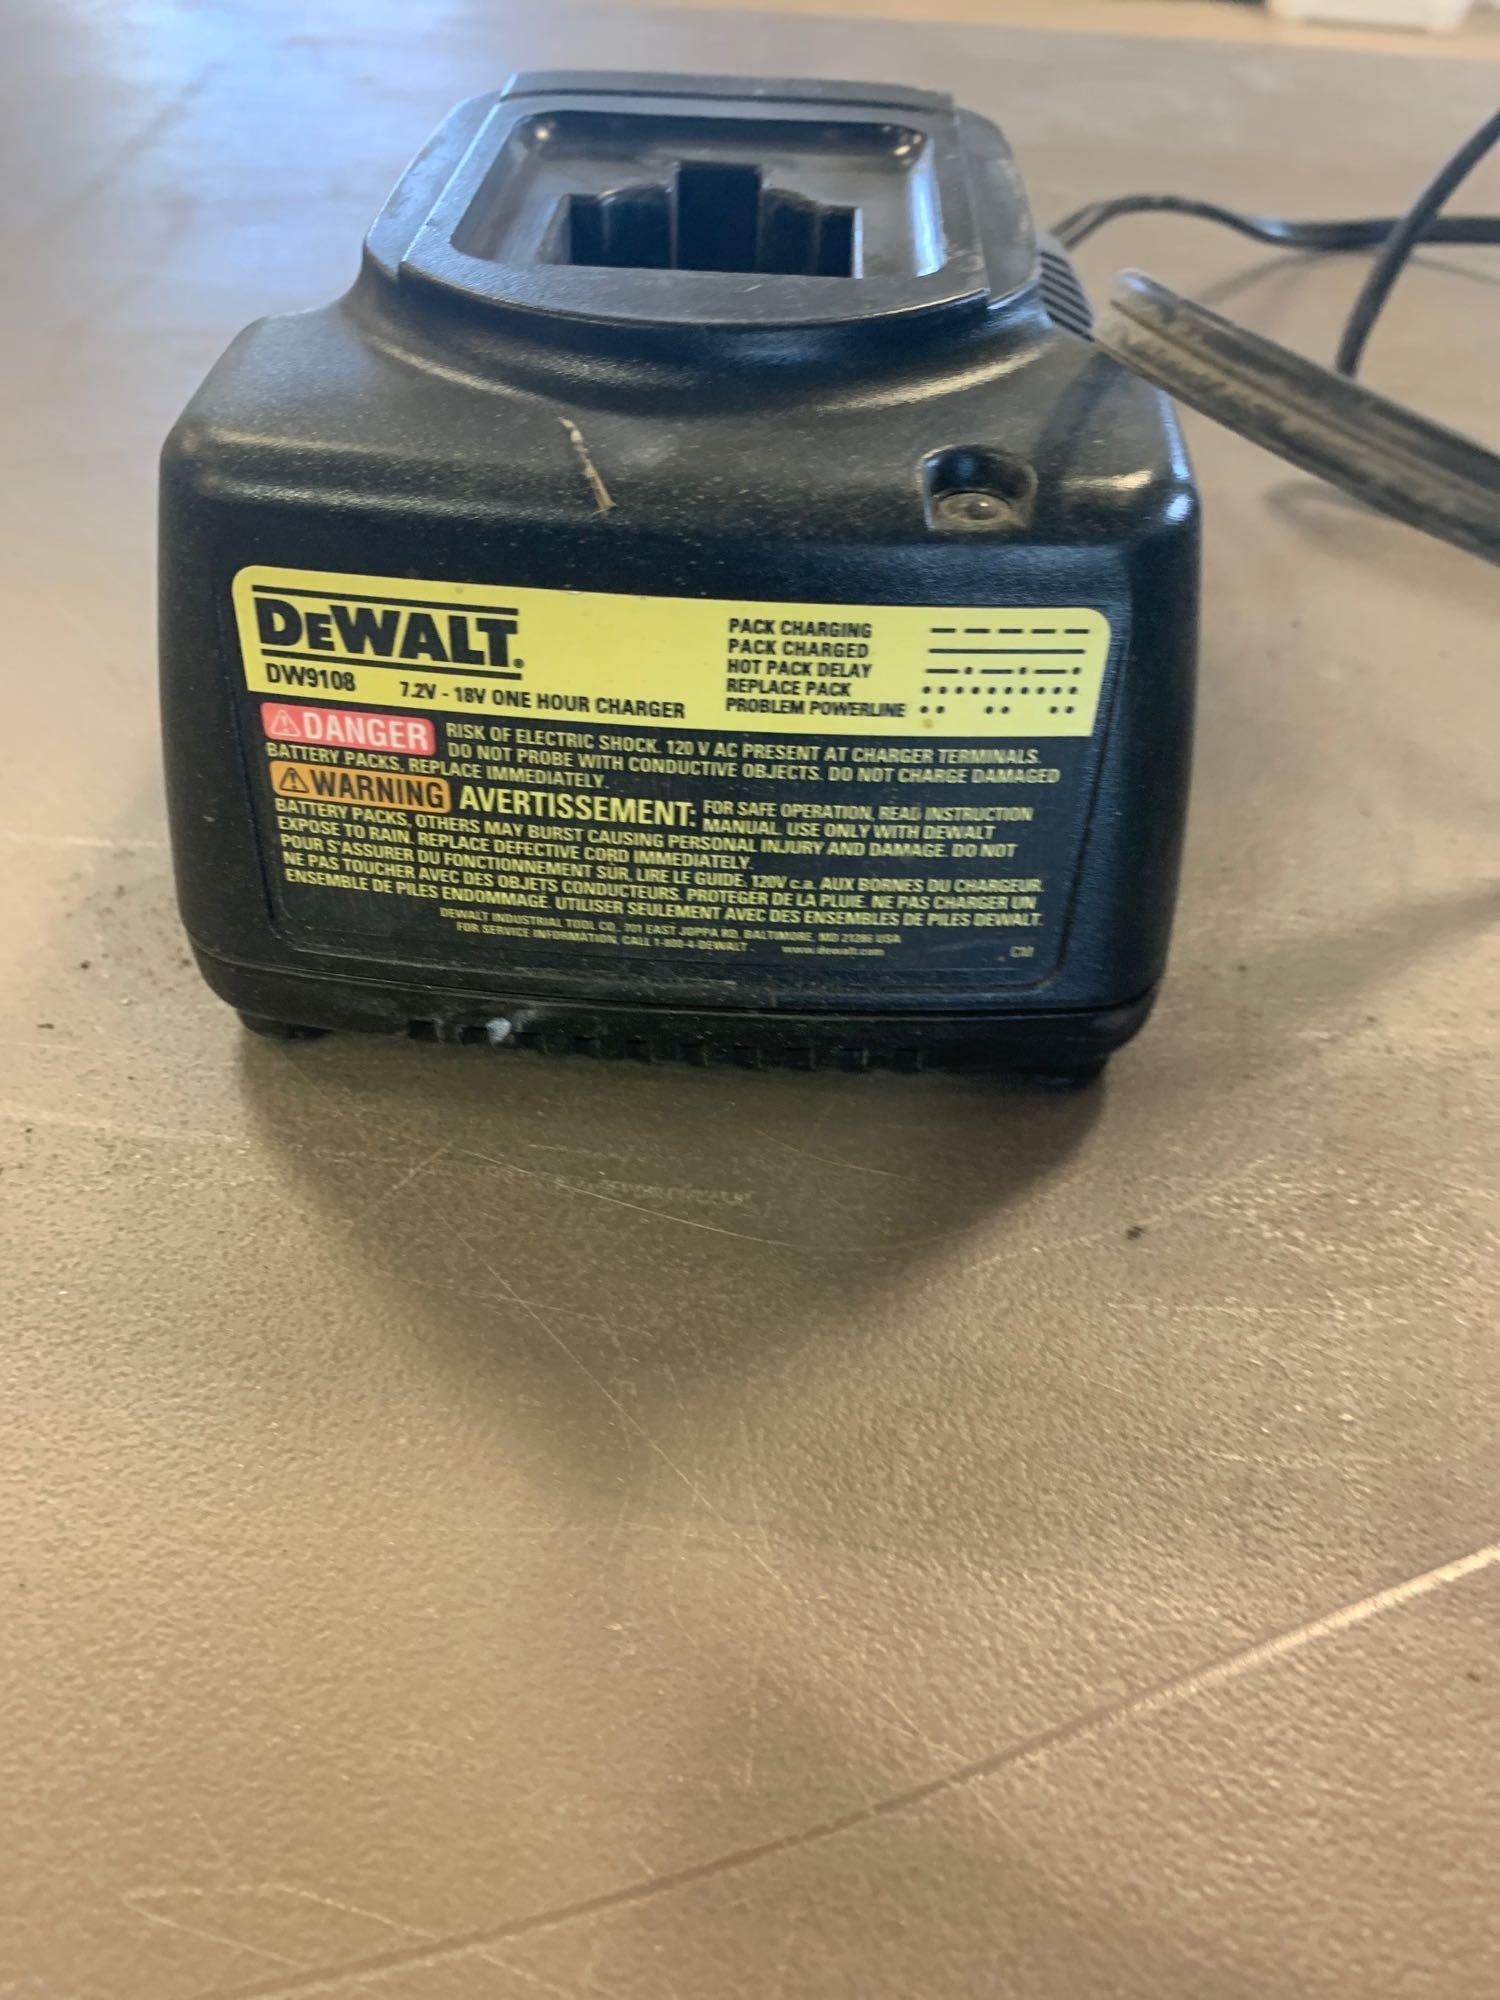 DeWalt 18v cordless cut off tool with charger (battery not good). SHIPPING AVAILABLE